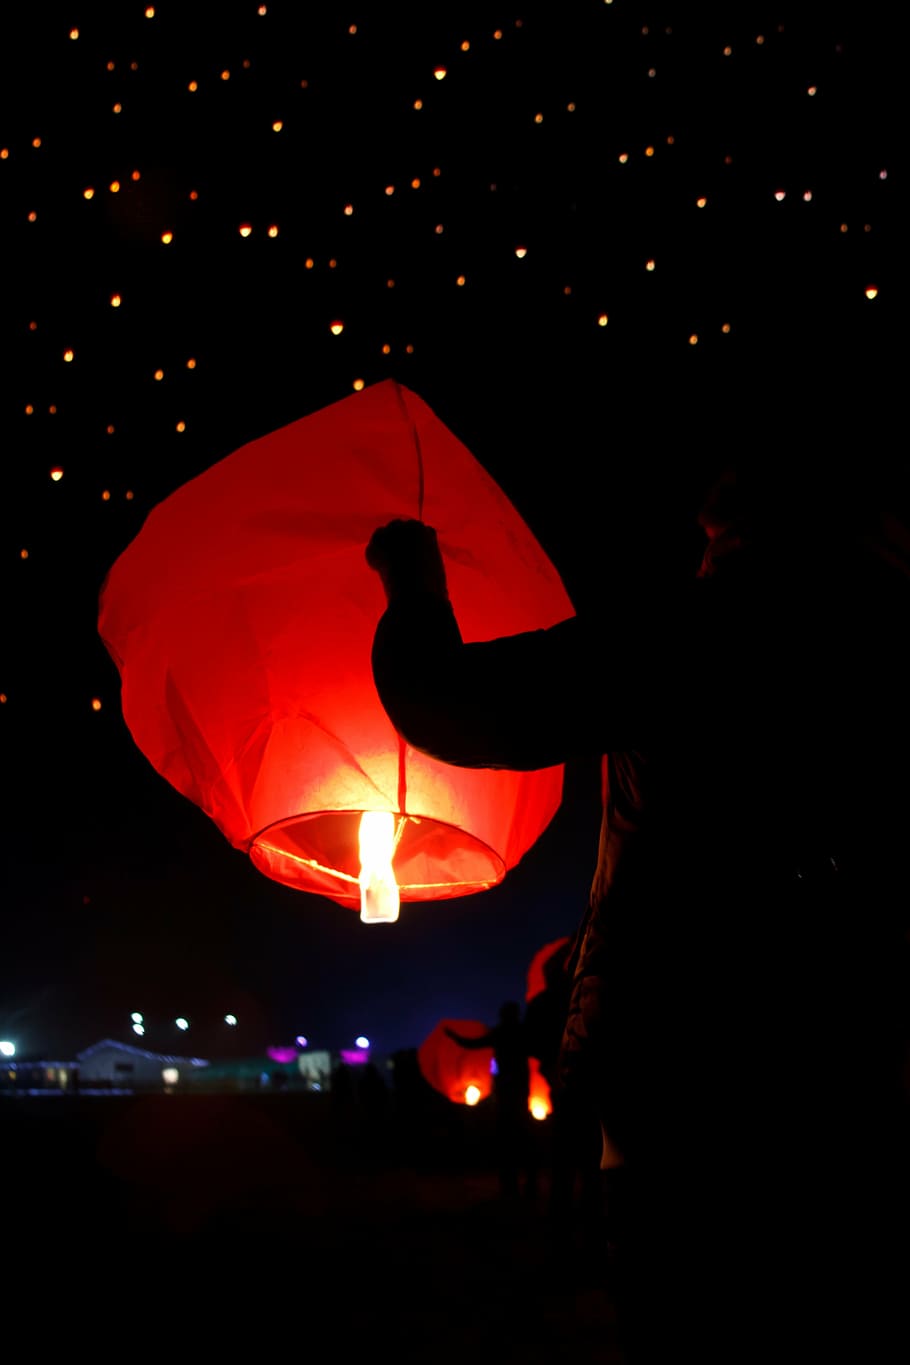 man, holding, lighted, sky lantern, night time, chinese, asian, candle, celebration, fire